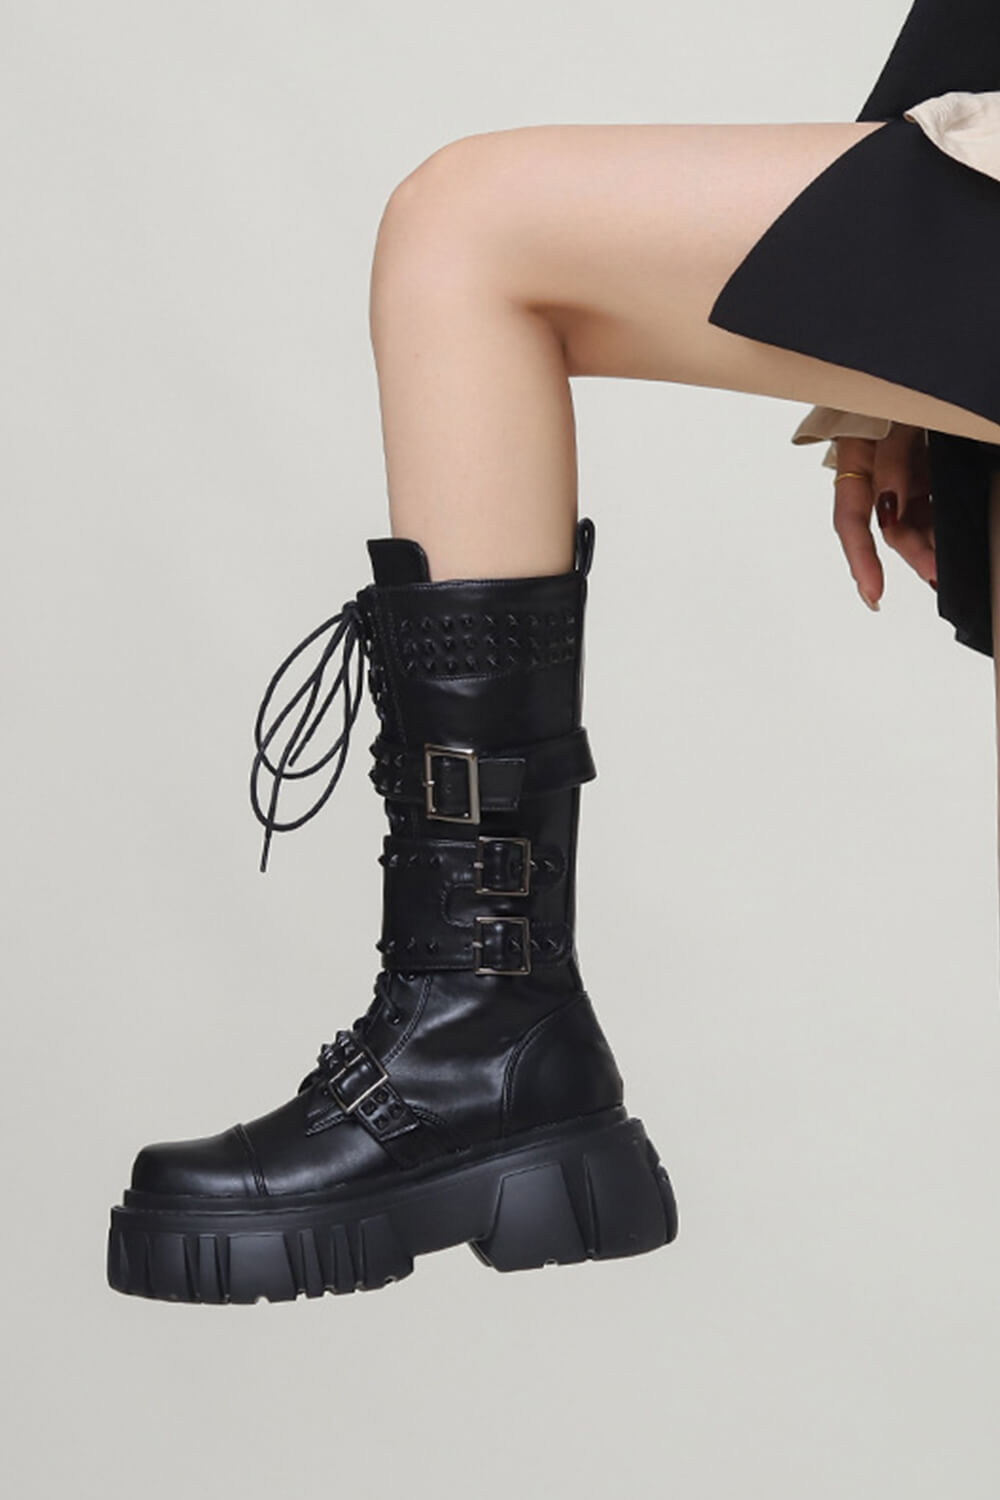 Black Lace Up Buckle Studded Chunky Platform Mid-Calf Combat Boots